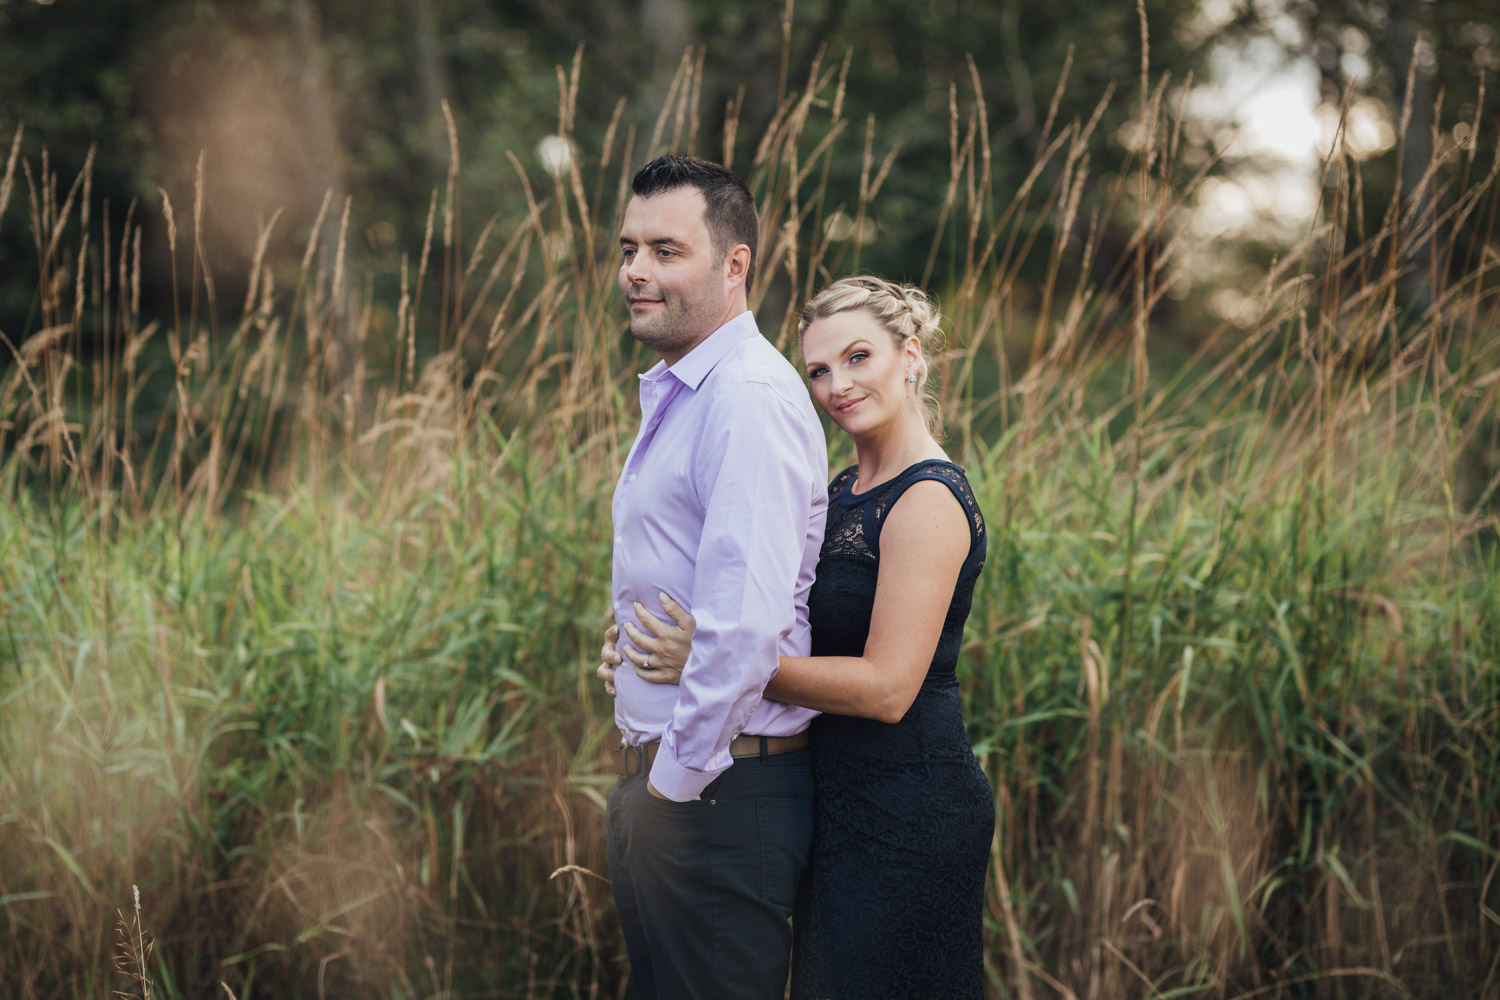 Engagement photography at Campbell Valley Park in Langley, BC